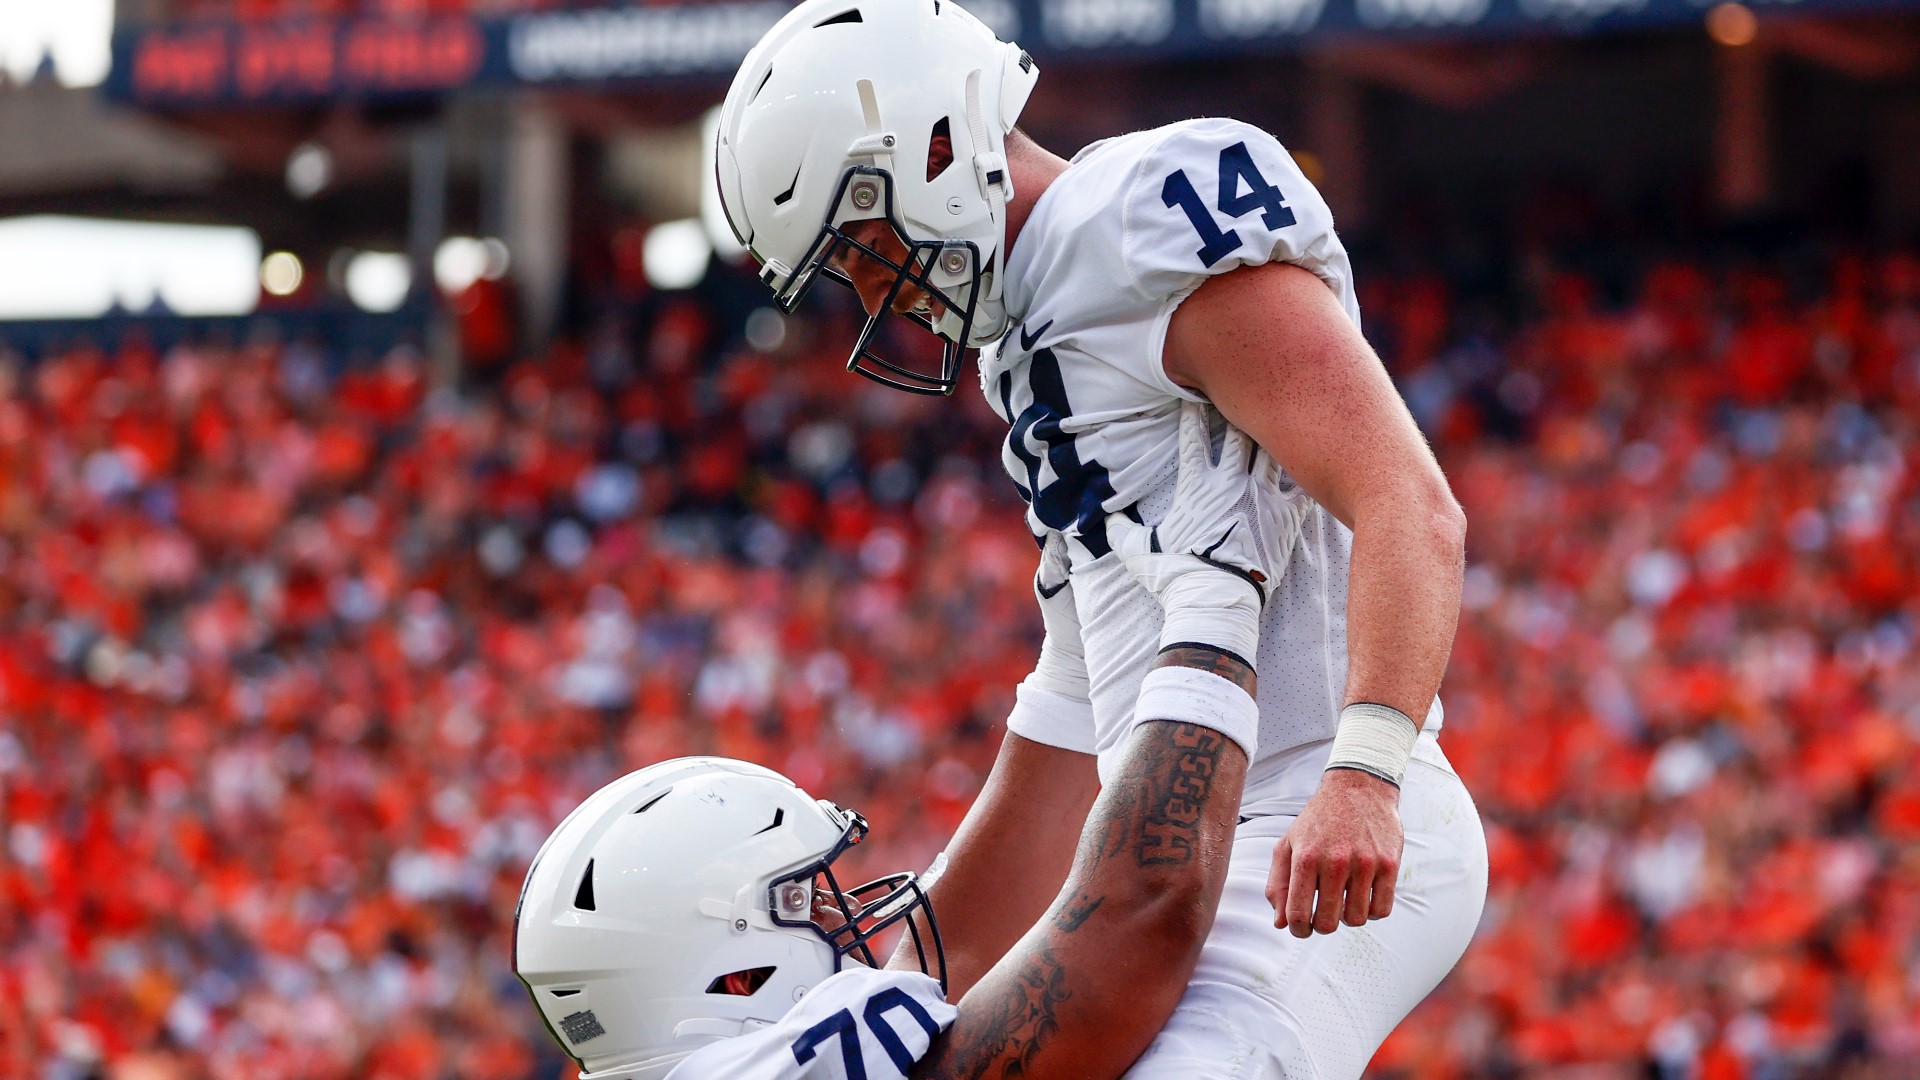 The Nittany Lions play a complete game on both sides of the ball to earn the historic win.